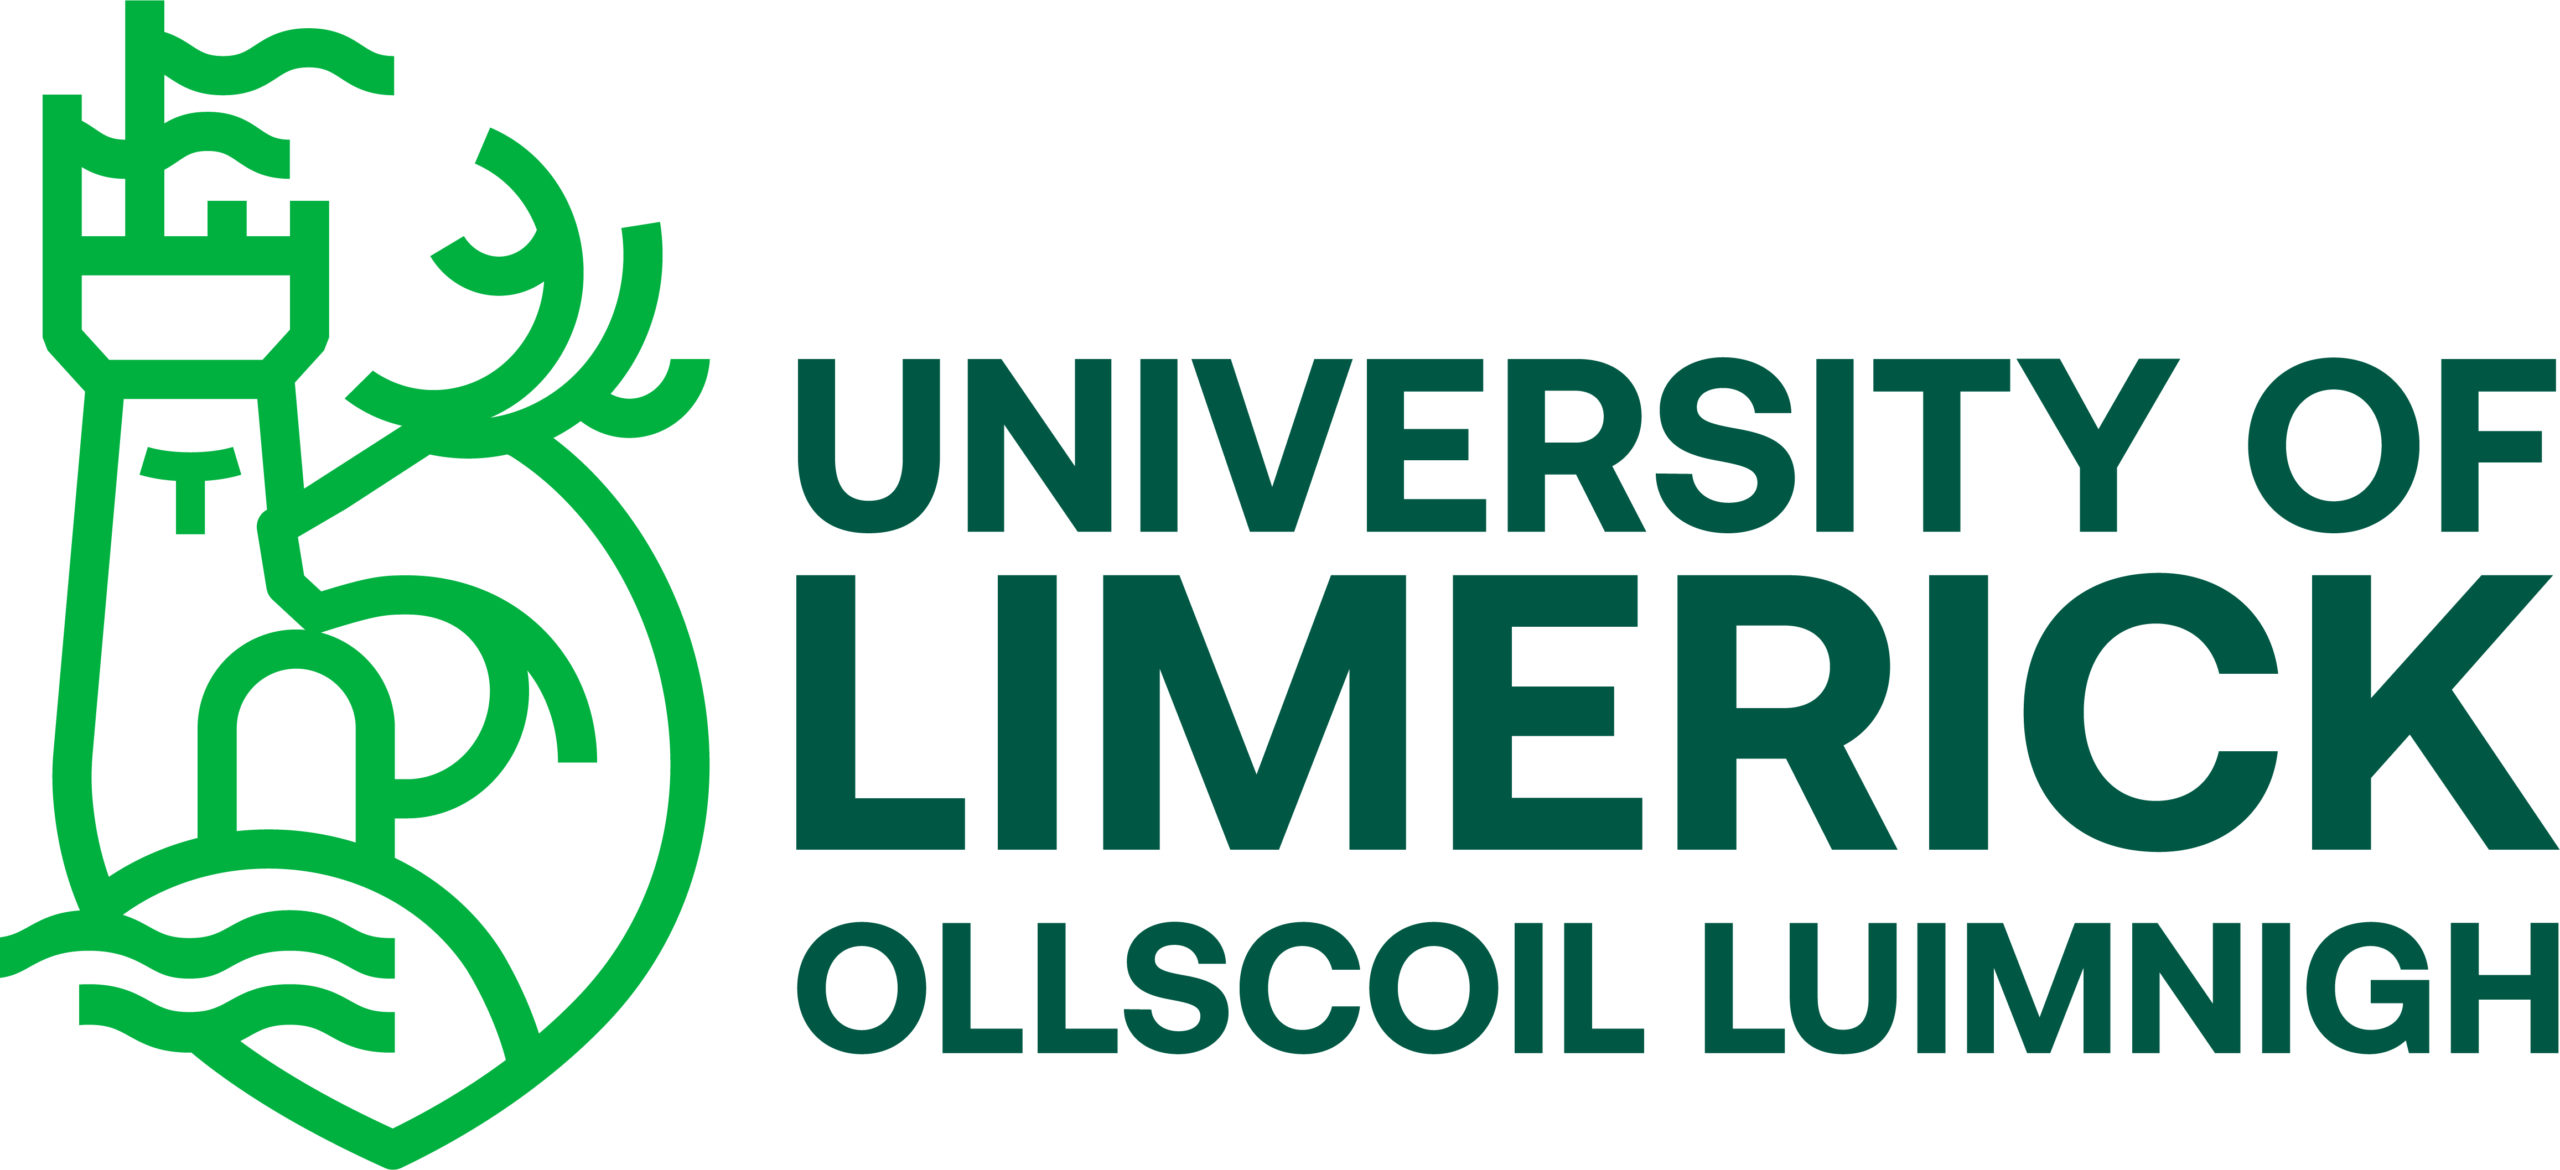 The Home of Firsts, University of Limerick, will be exhibiting at Career Path Expo